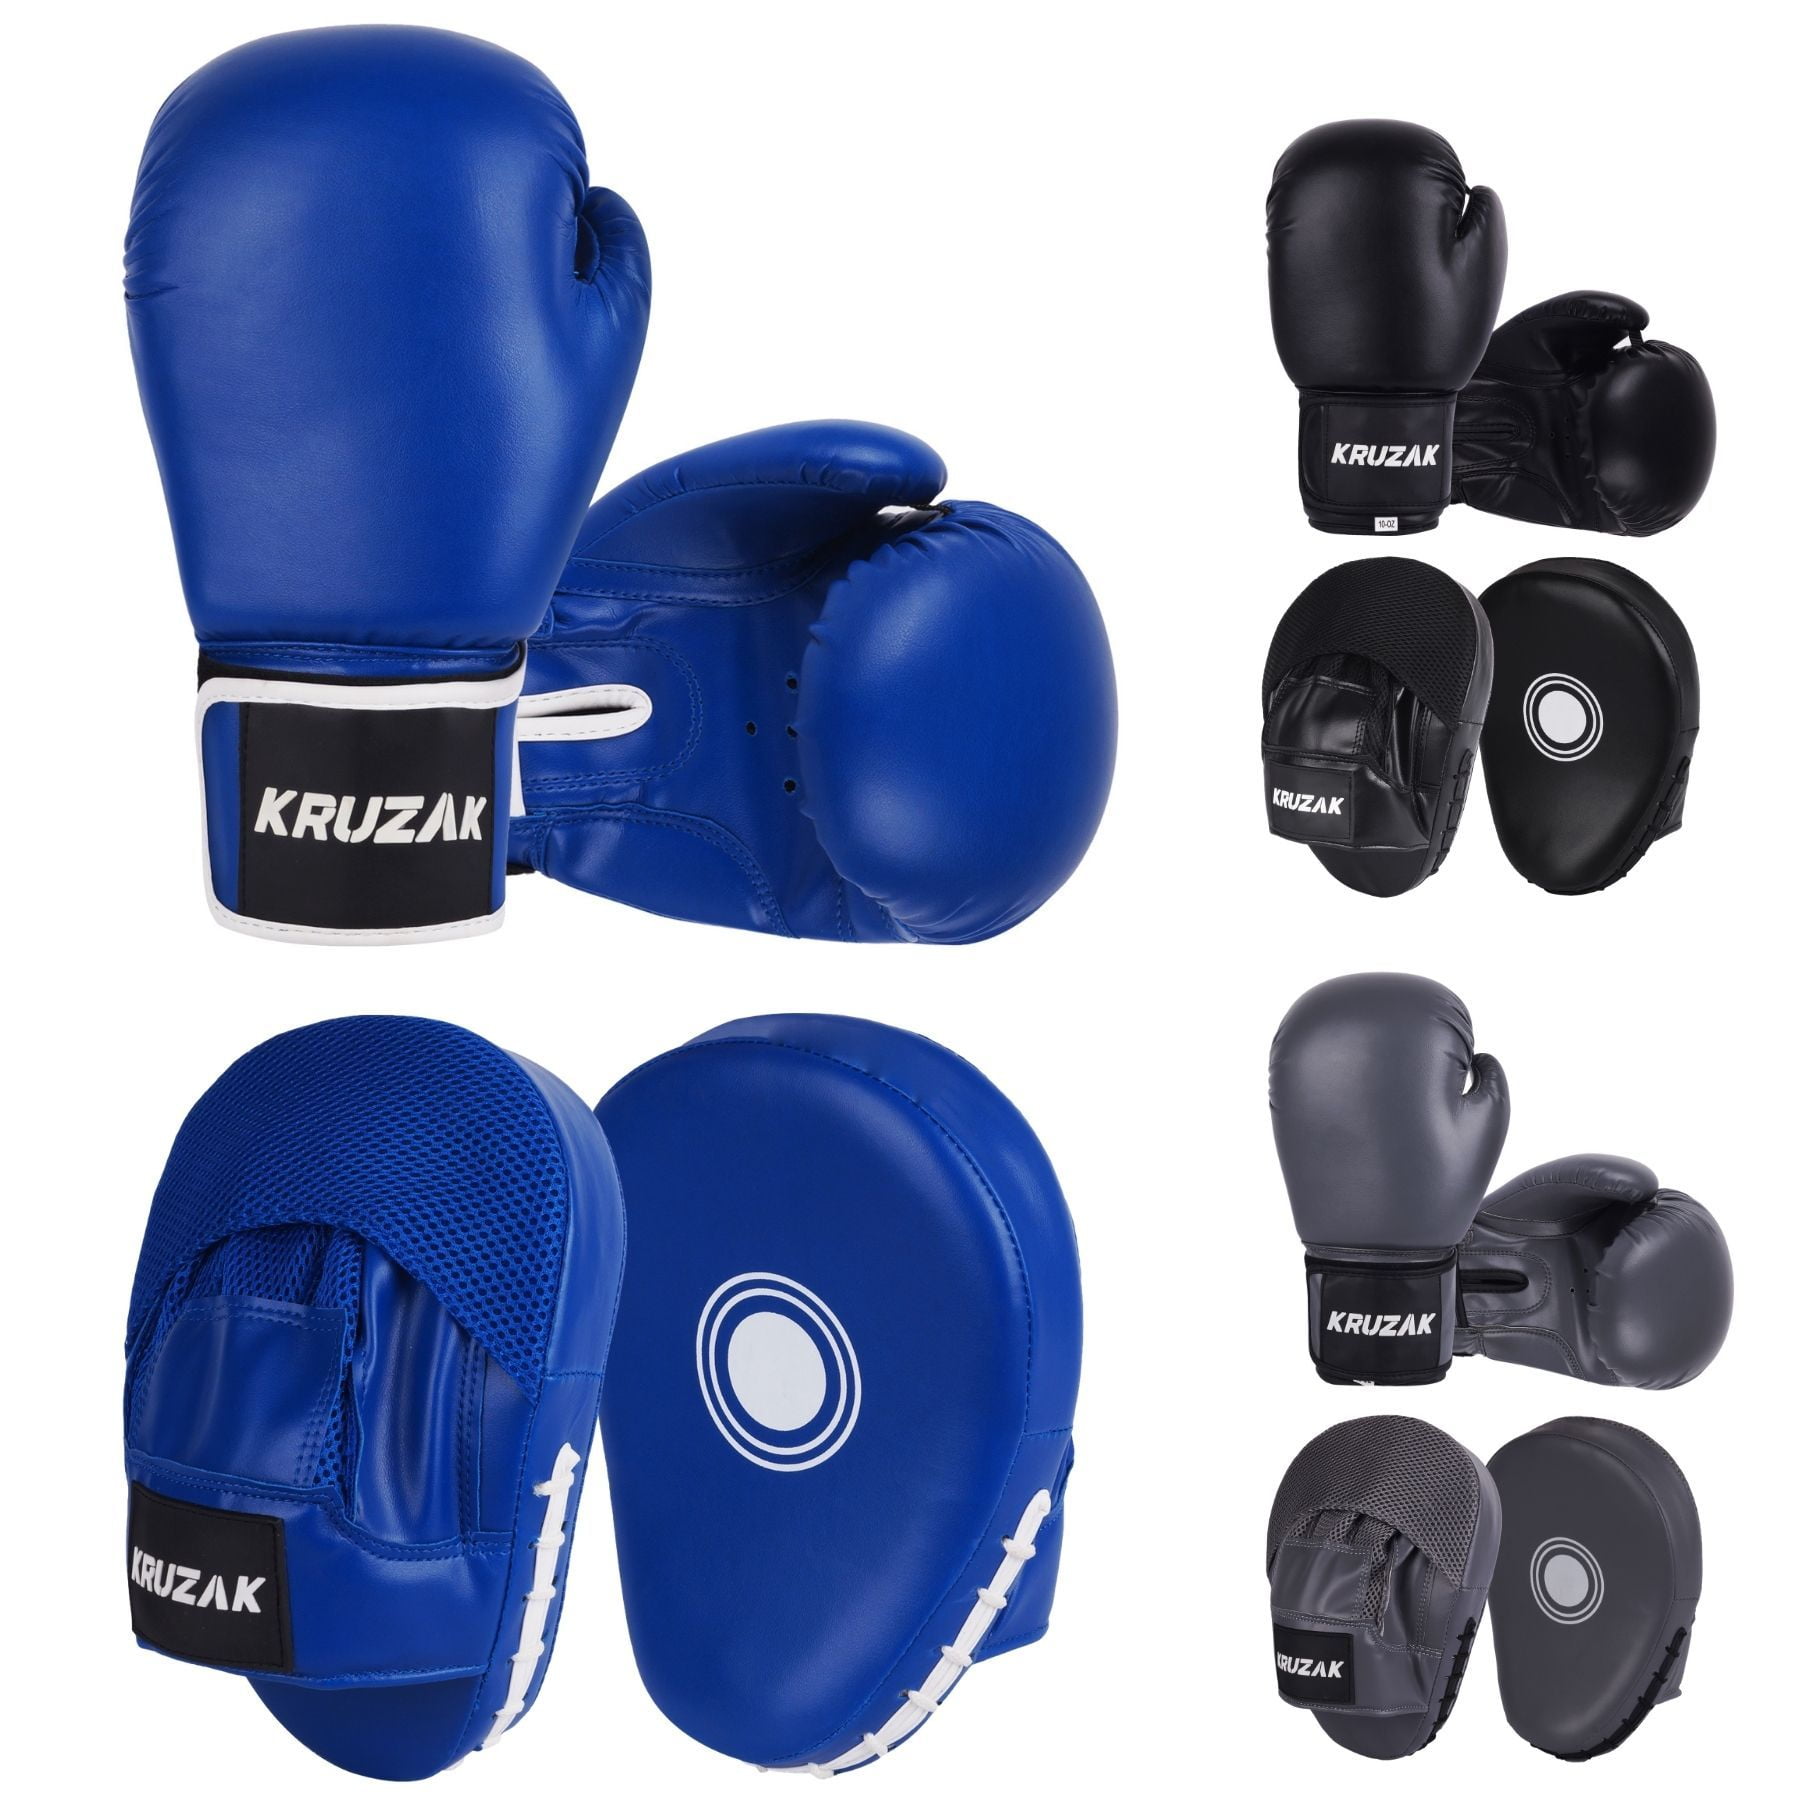 VELO Microfiber Boxing Focus Pads Punch Mitts Hook and Jab Training Punch Curved 